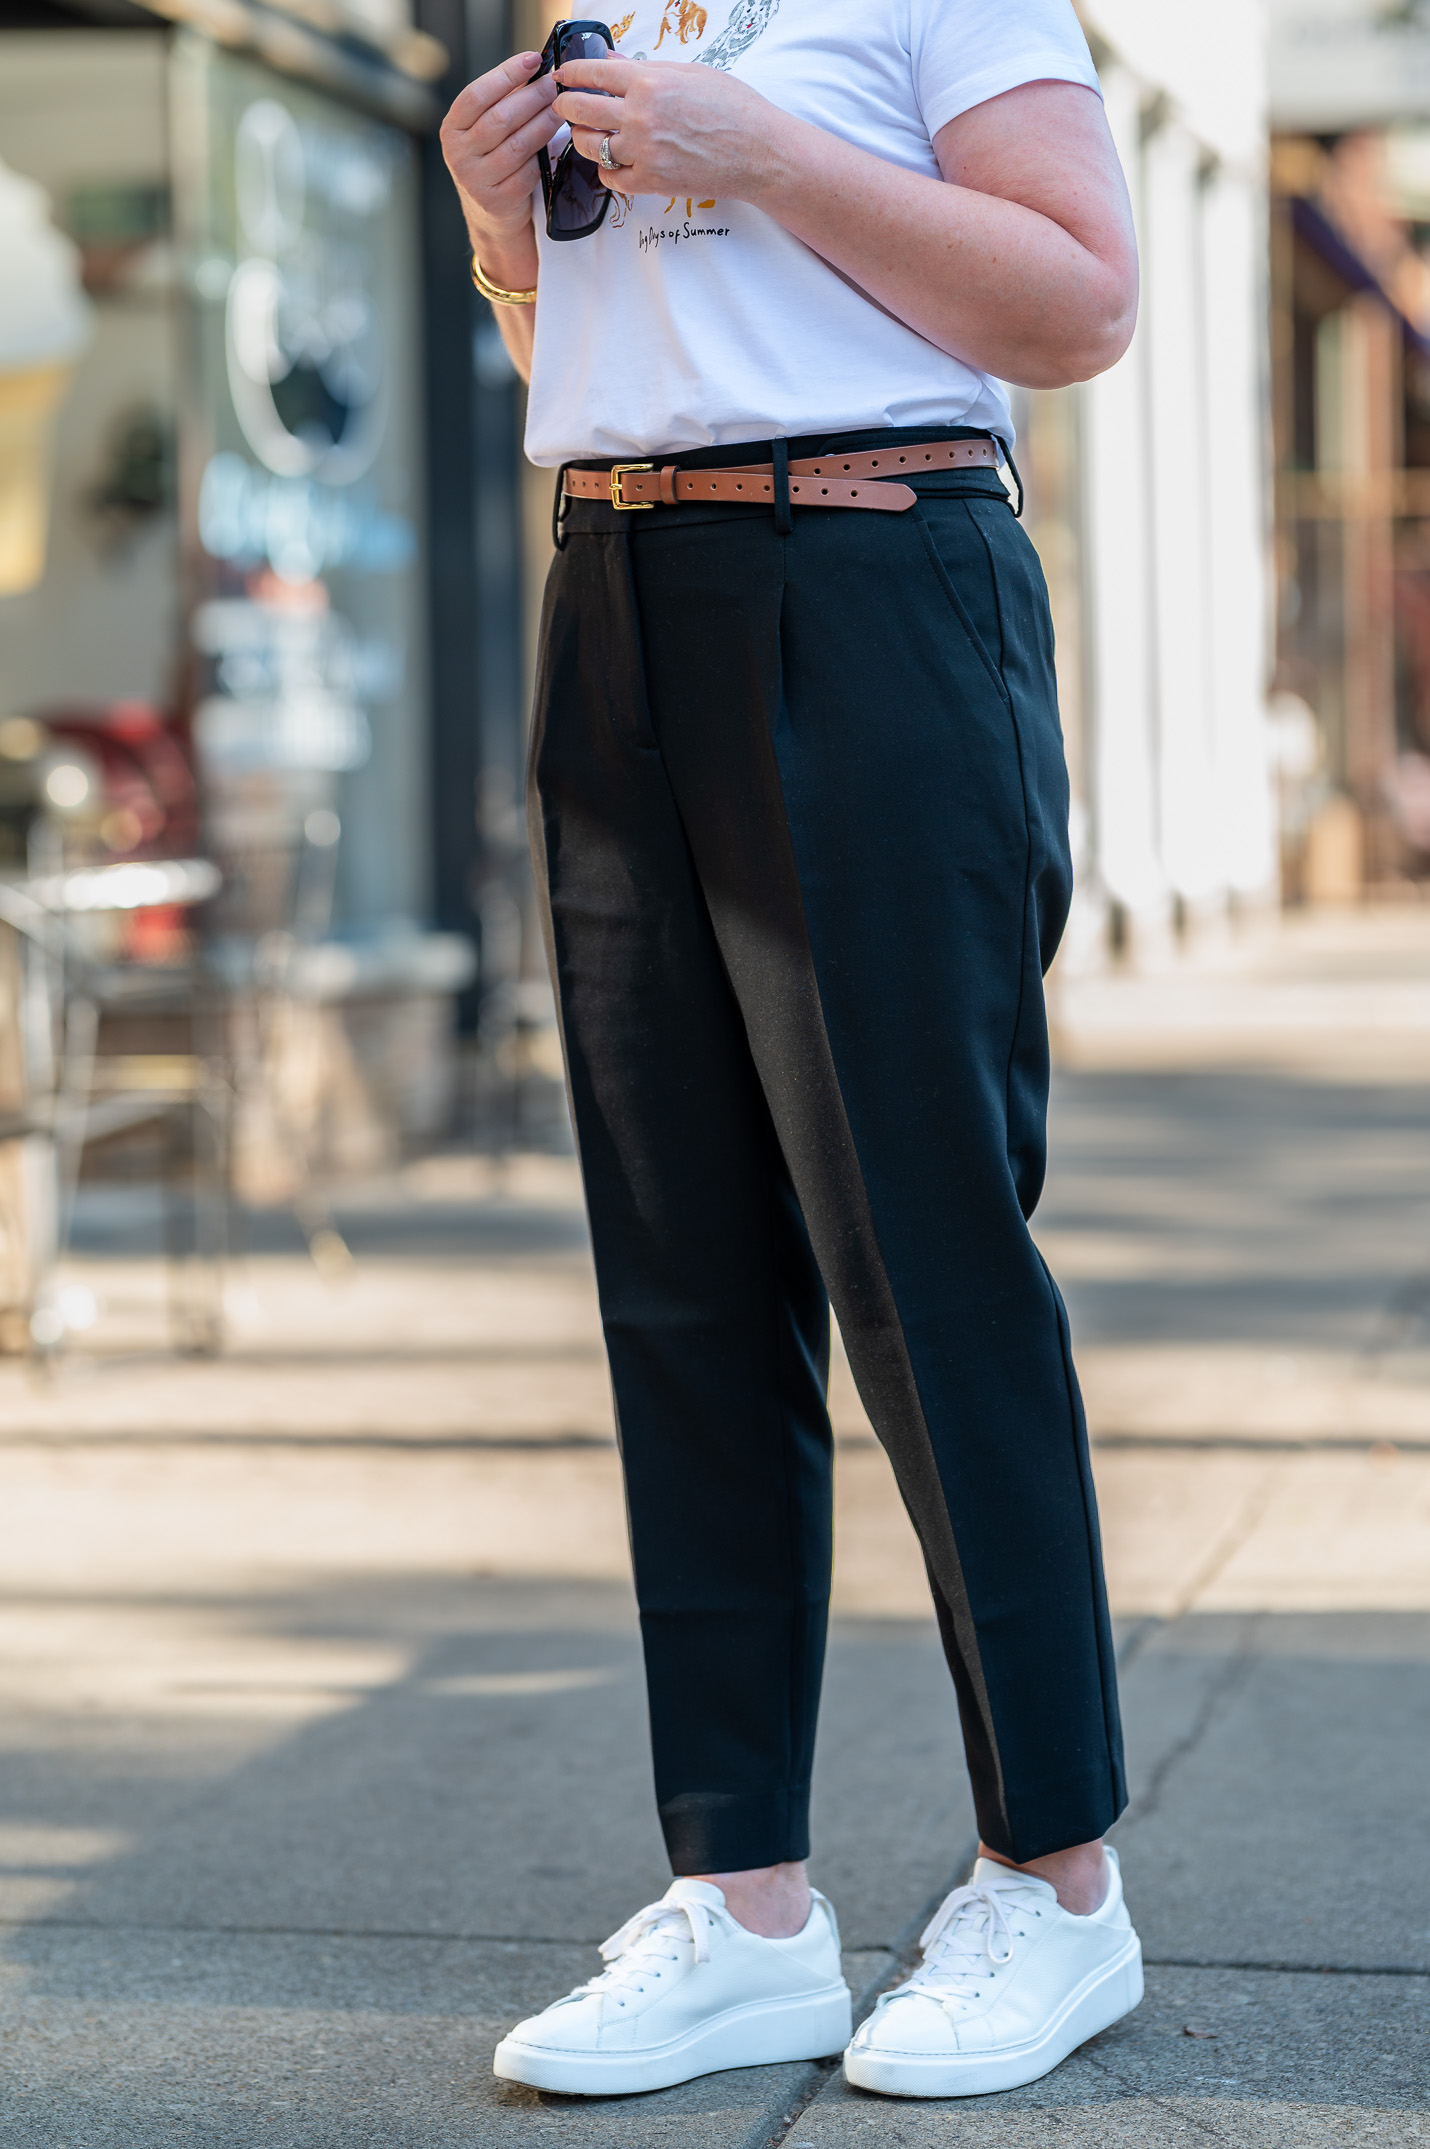 The Tribeca Pants from Talbots